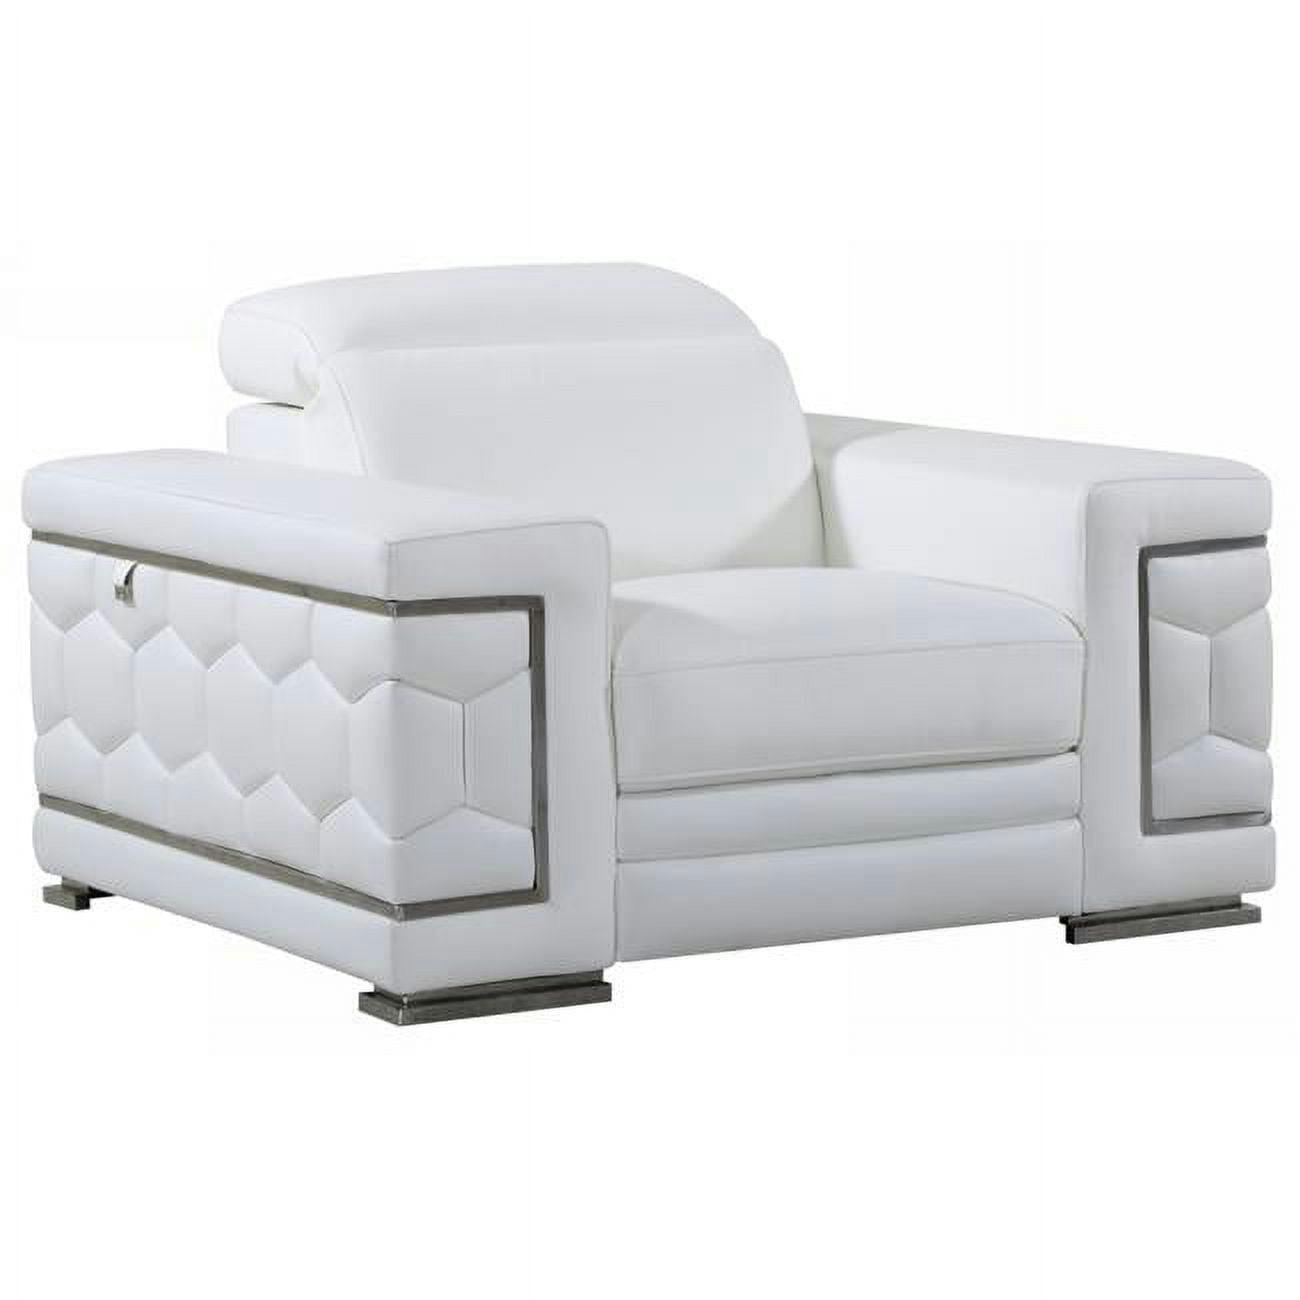 Elegant White Leather Recliner with Contemporary Design